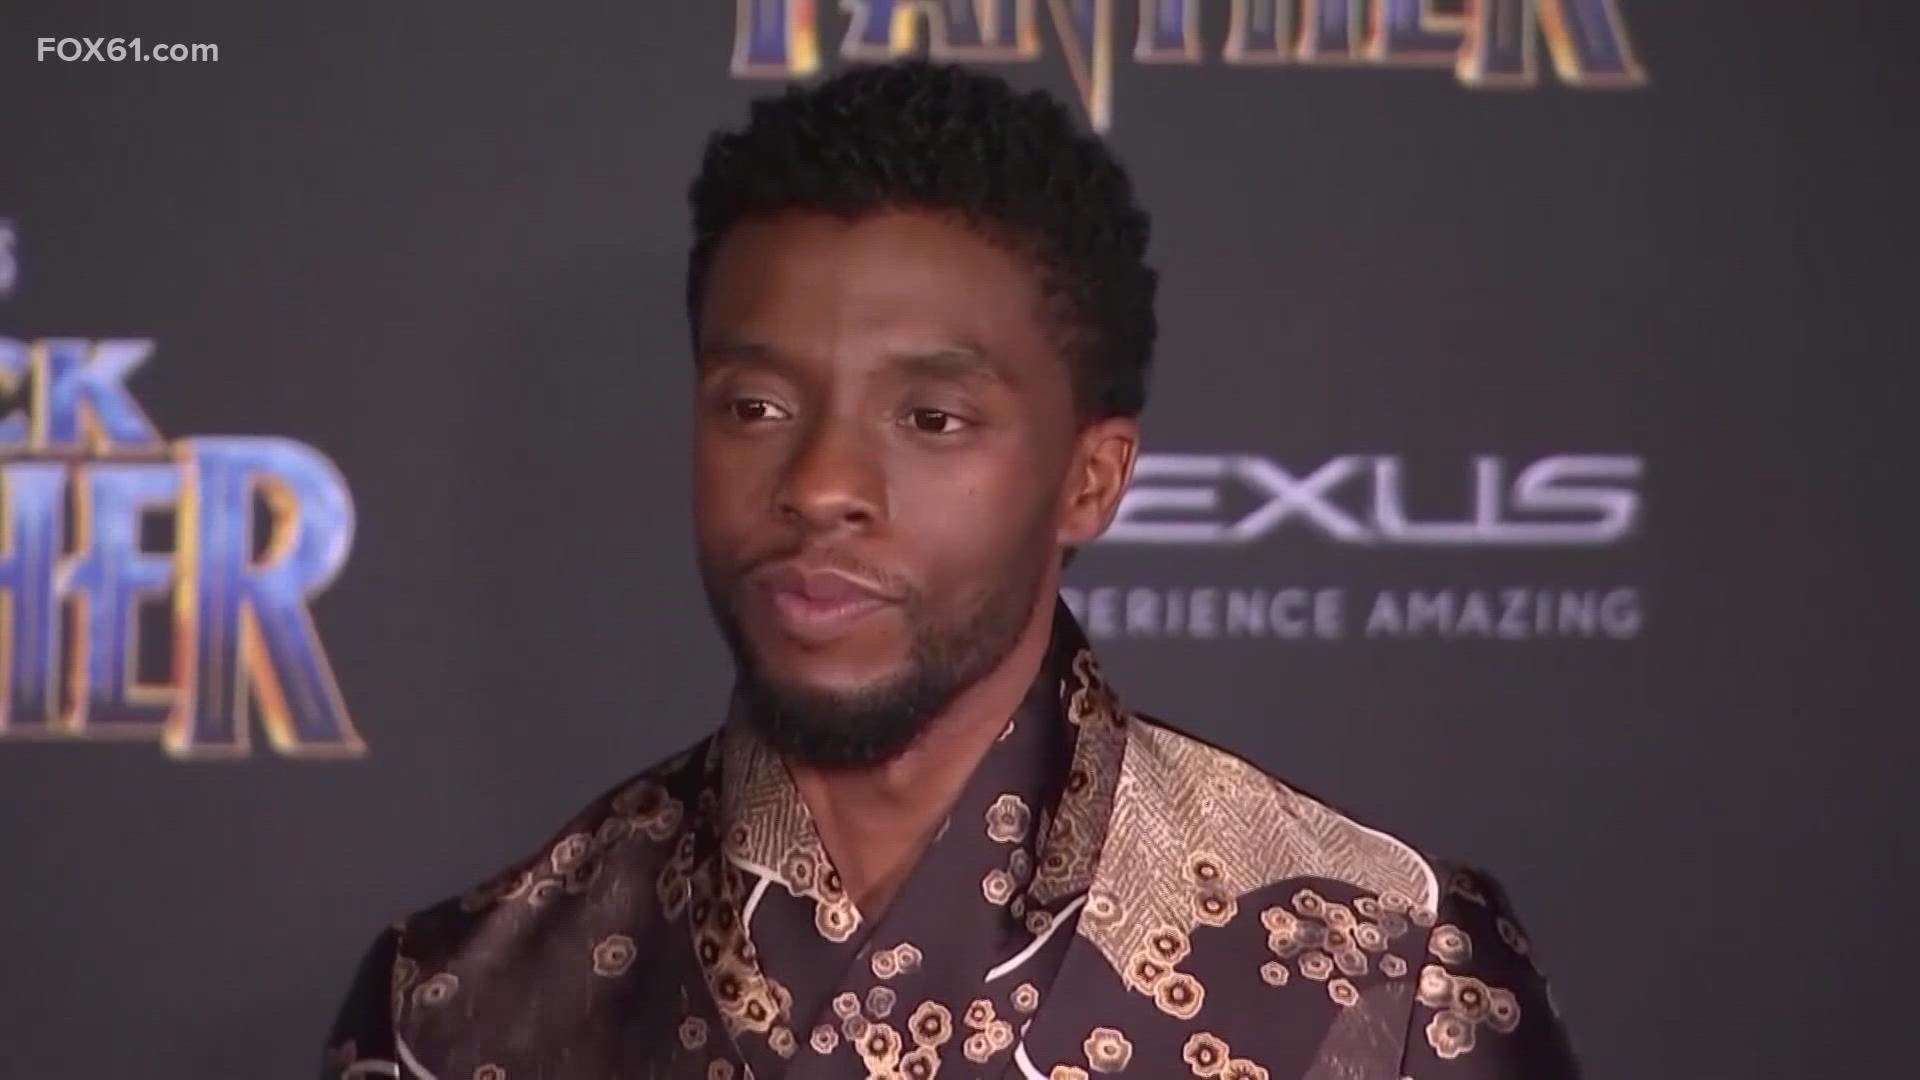 Black Panther star Chadwick Boseman lost his life in 2020 after his four-year battle with colon cancer.